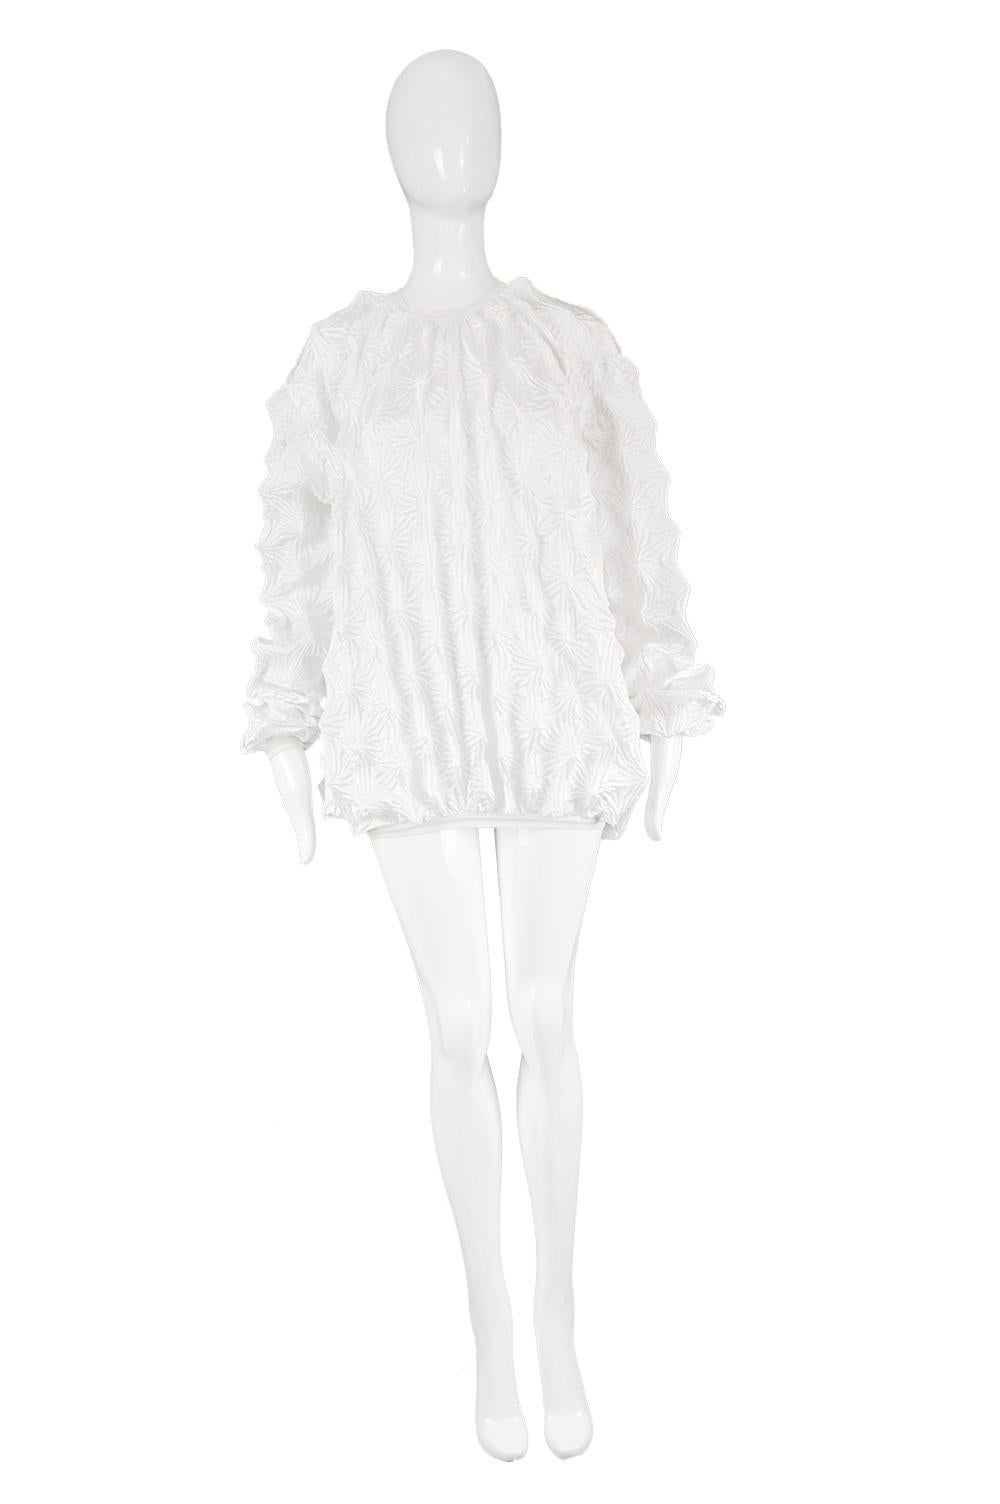 Dexter Wong Vintage Architectural White Top as Seen on Michael Jackson ...